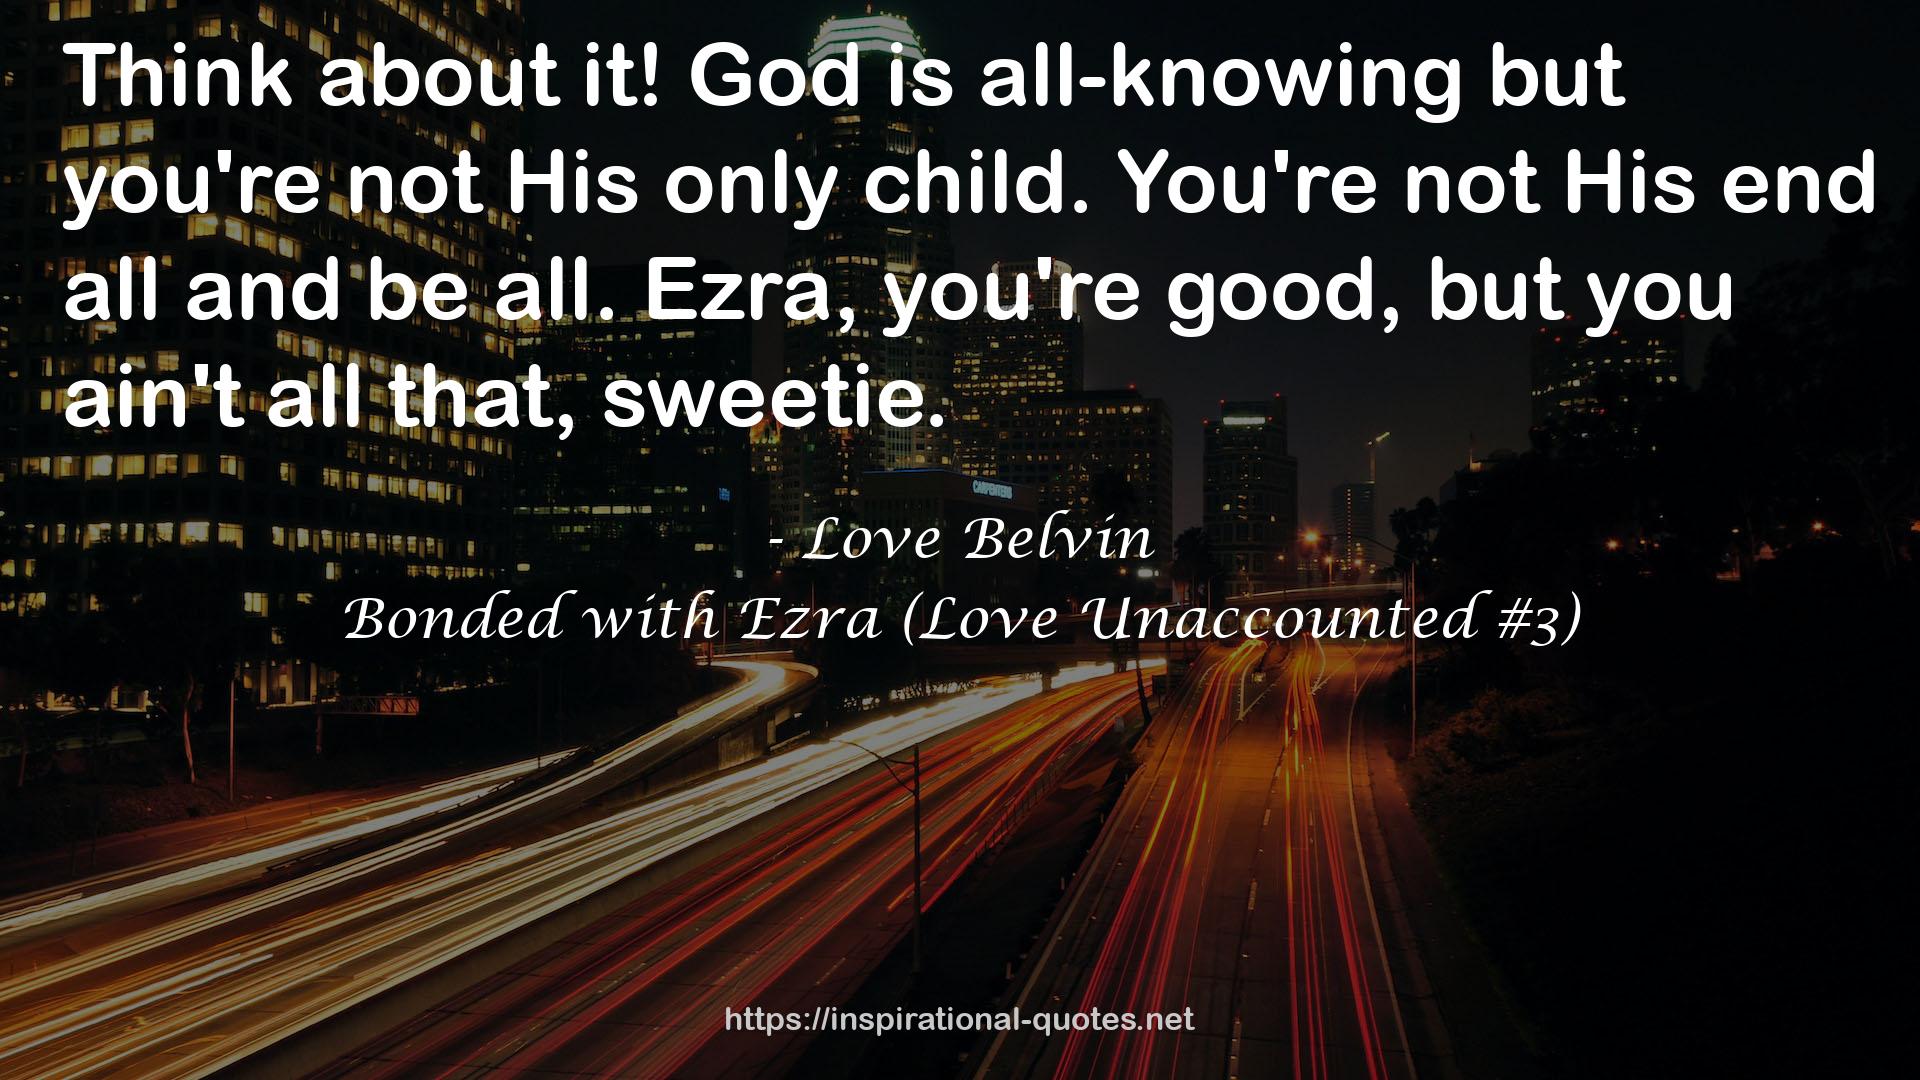 Bonded with Ezra (Love Unaccounted #3) QUOTES